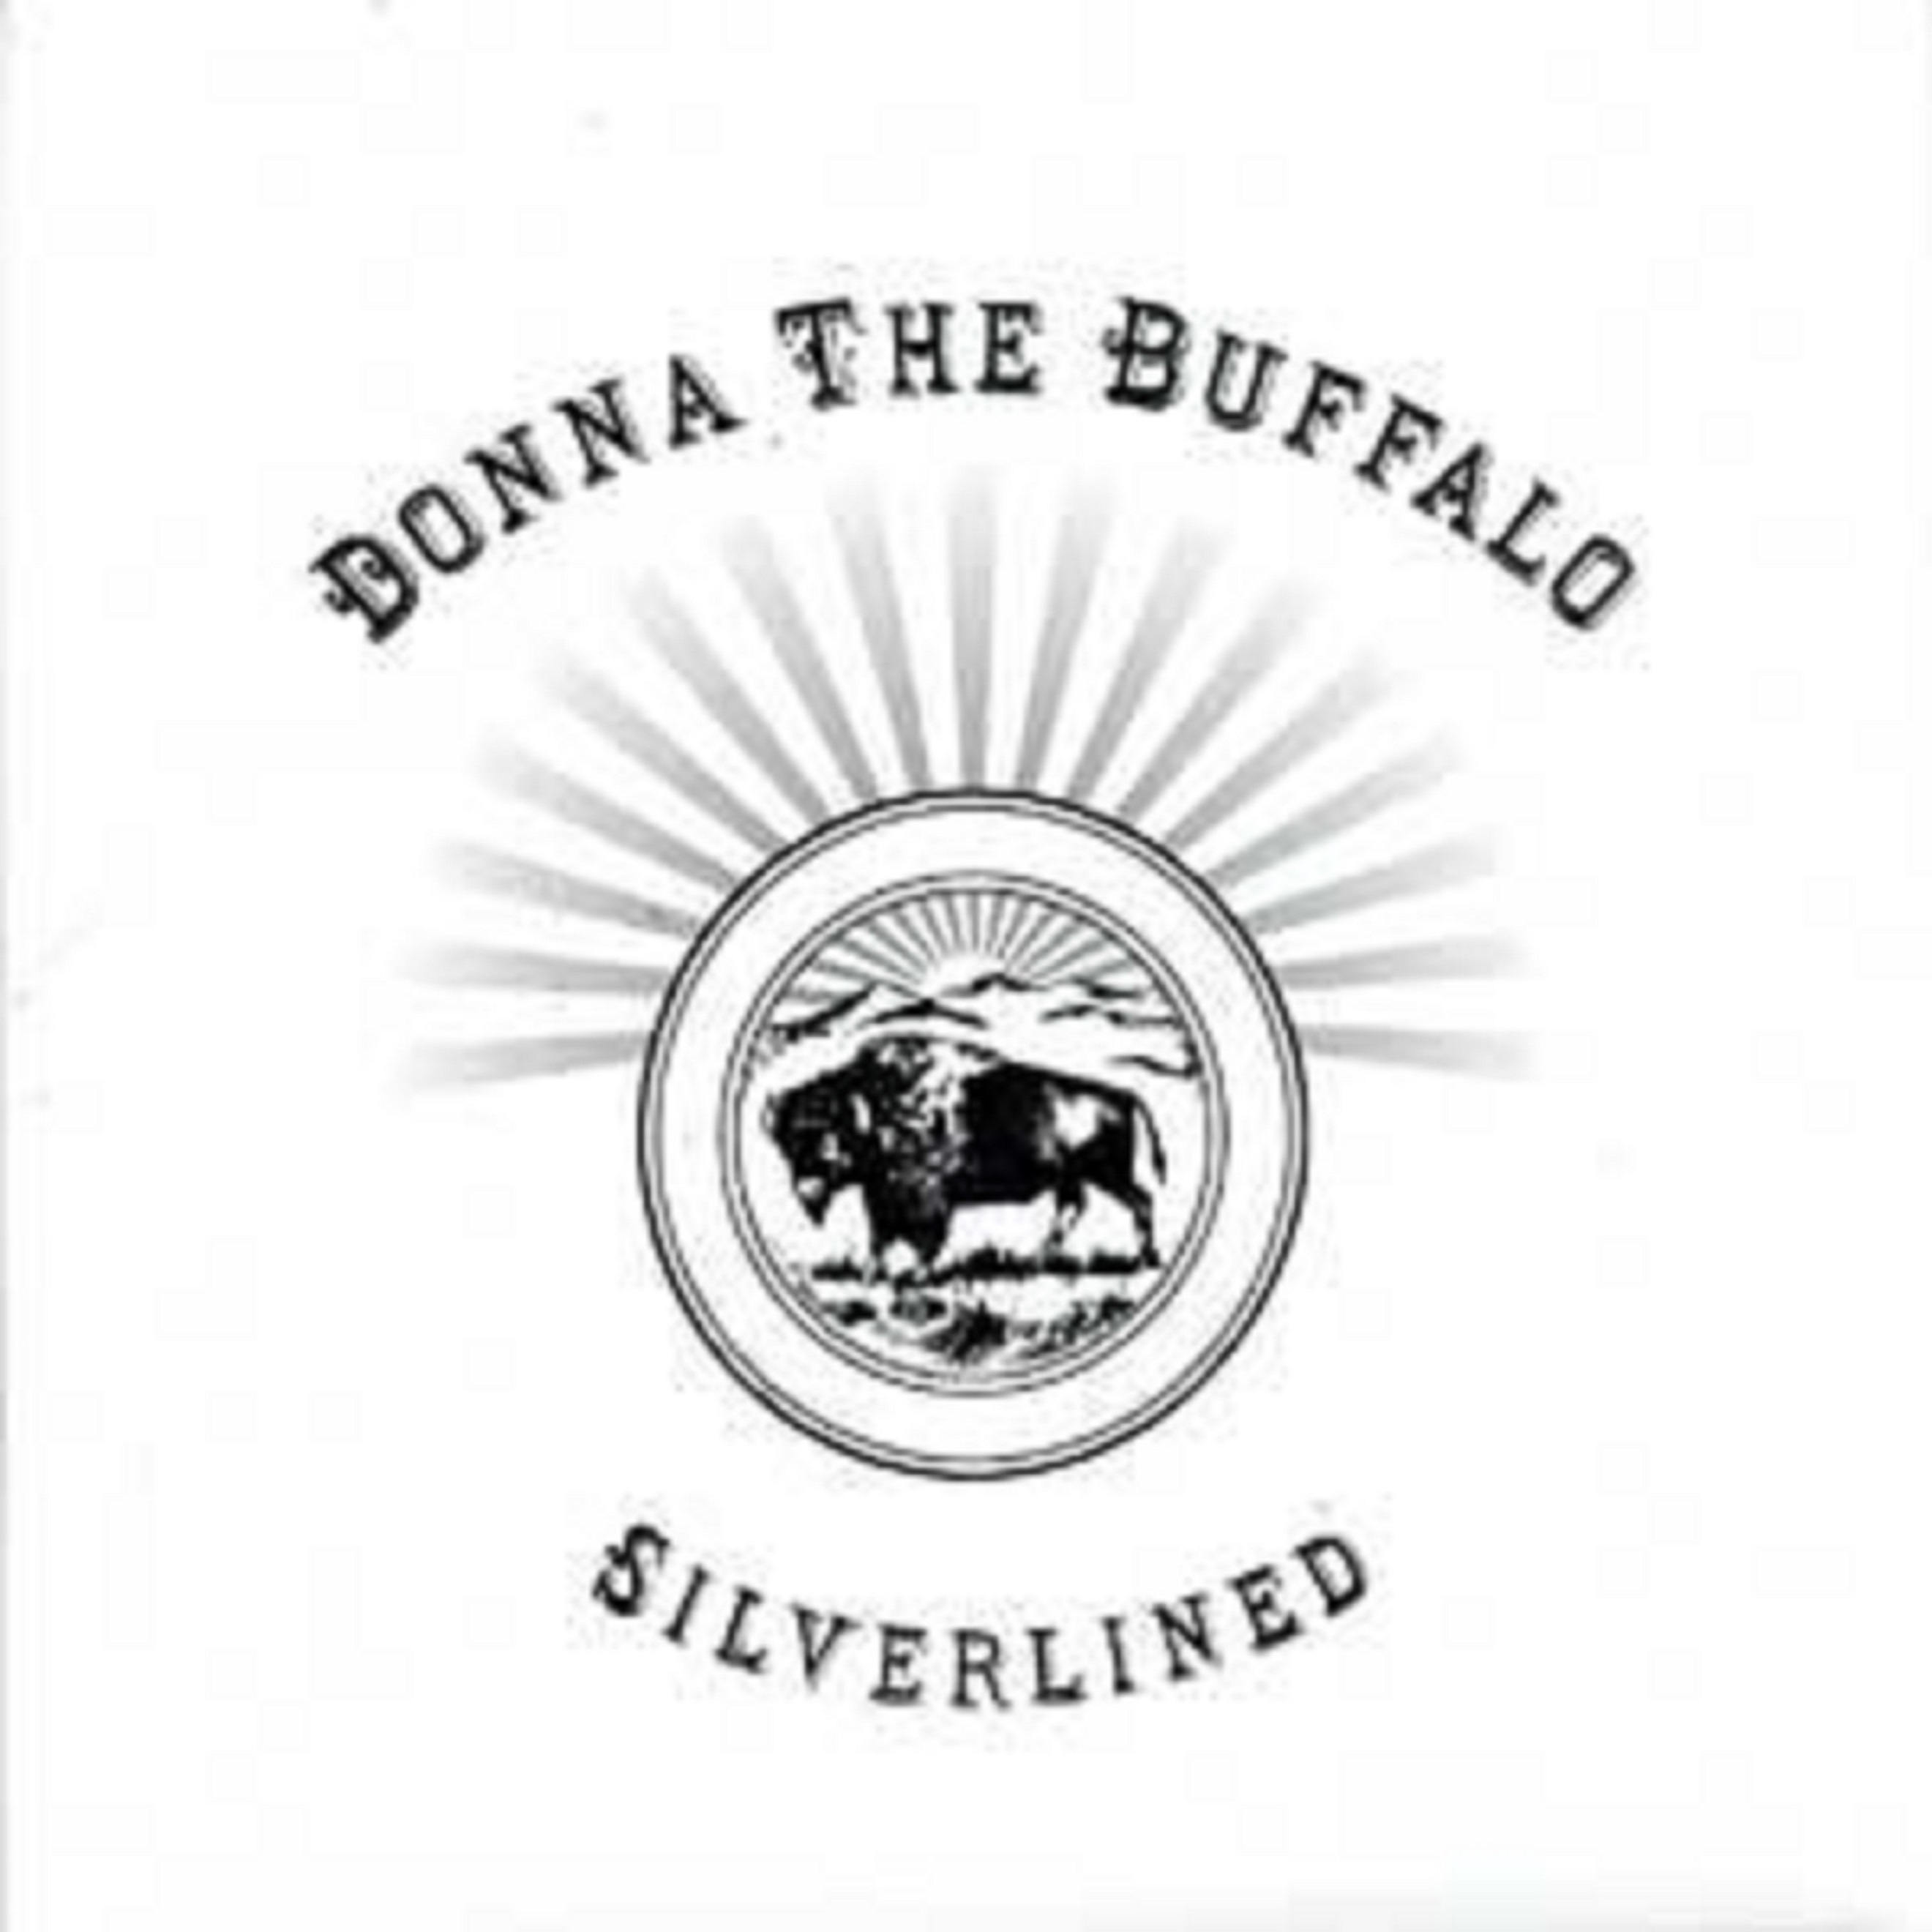 Donna the Buffalo Lines Silverlined with Country, Tinkers with Genres Across The Board